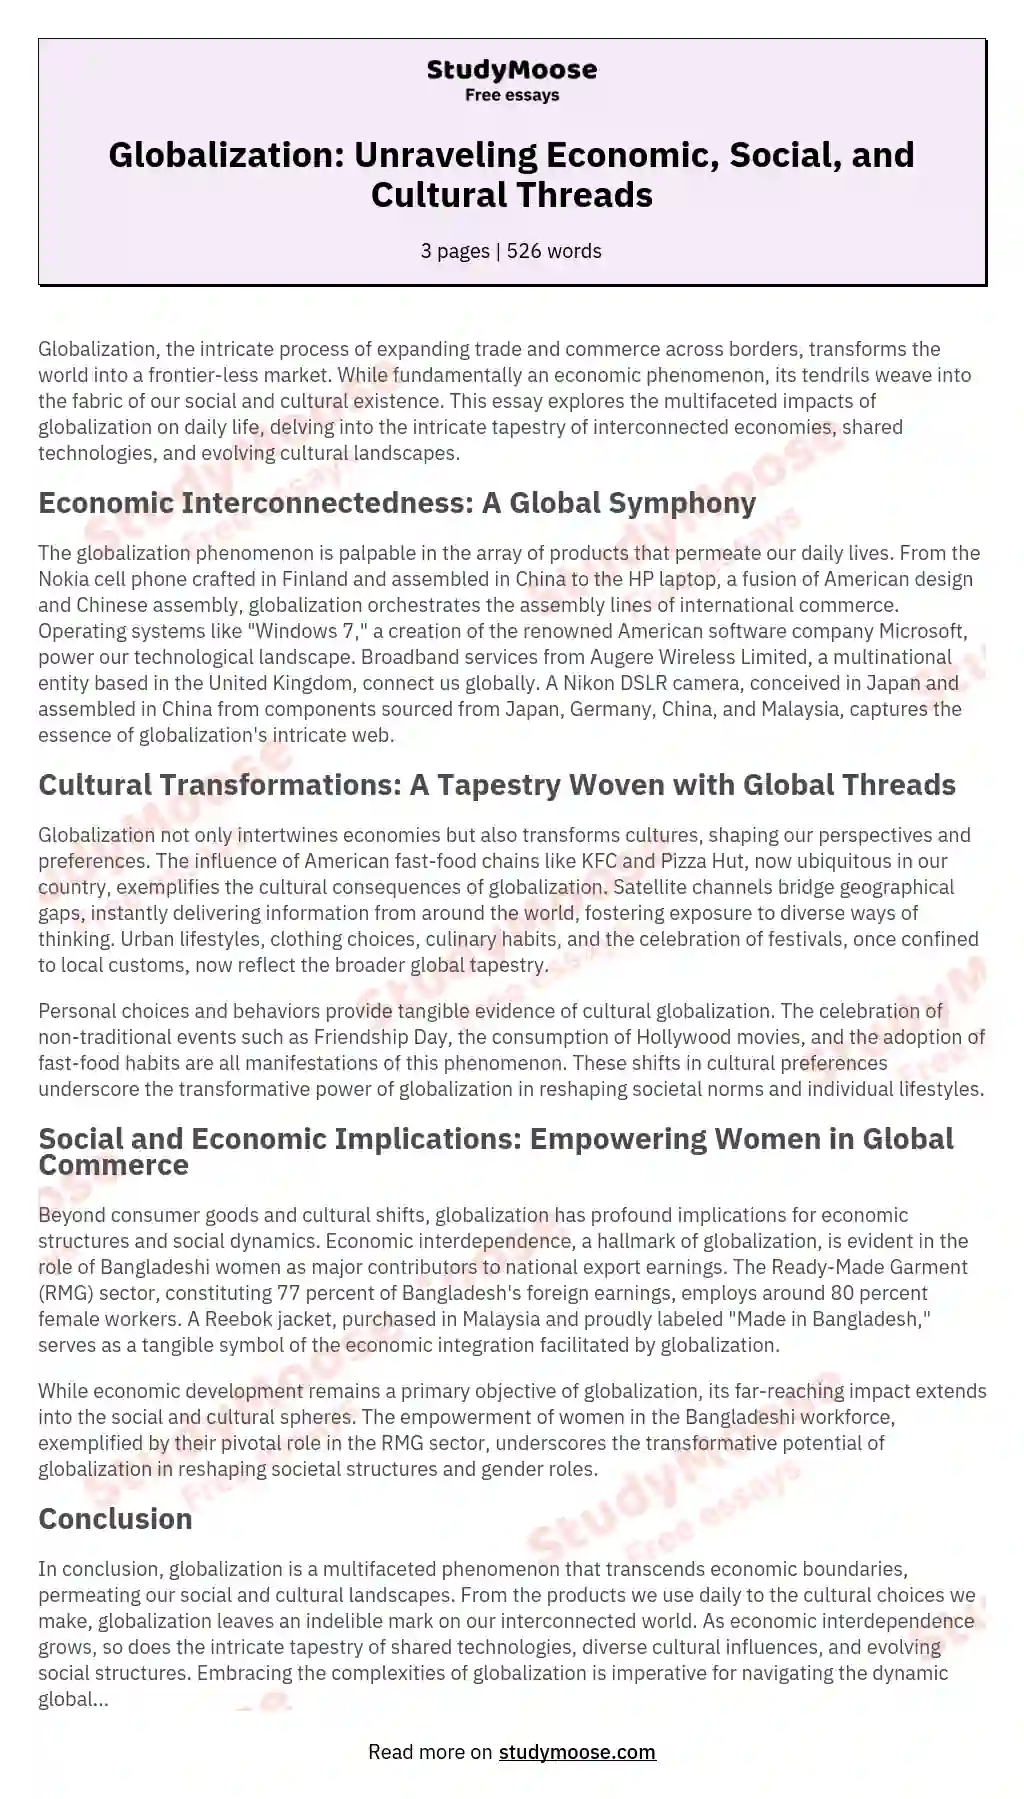 Globalization: Unraveling Economic, Social, and Cultural Threads essay